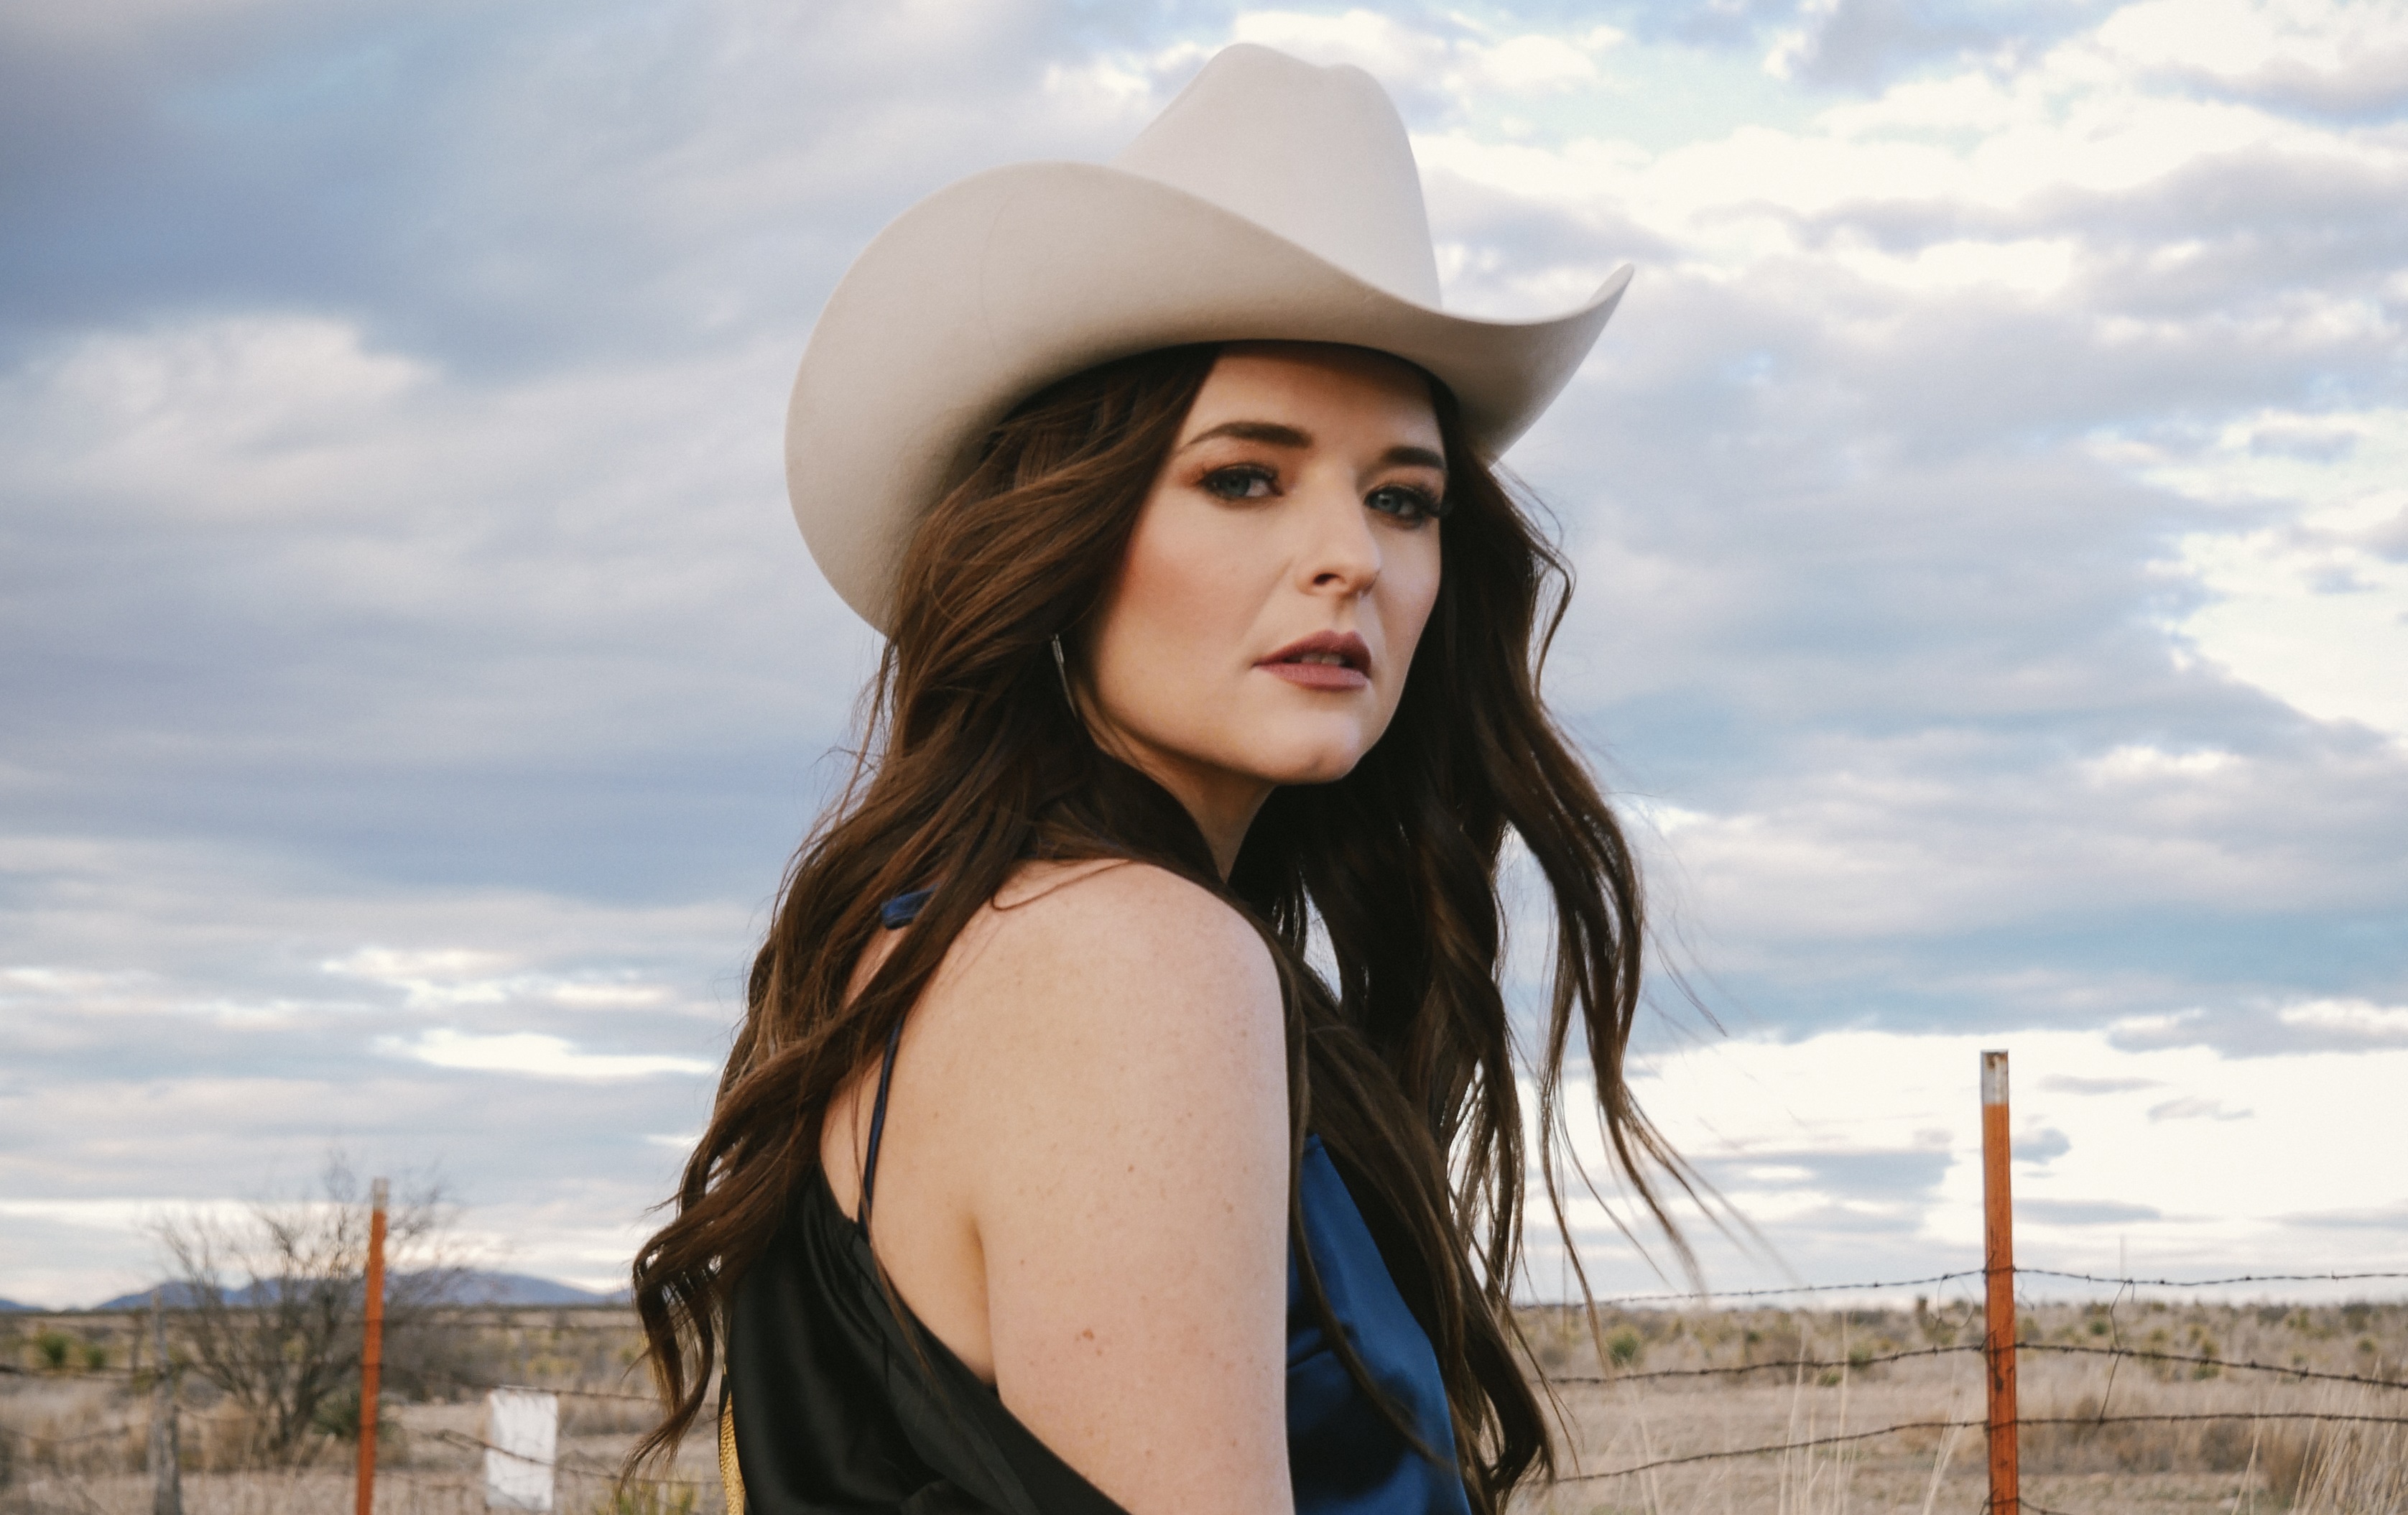 Go Behind the Scenes of Jenna Paulette's 'Wild Like the West' Video ...